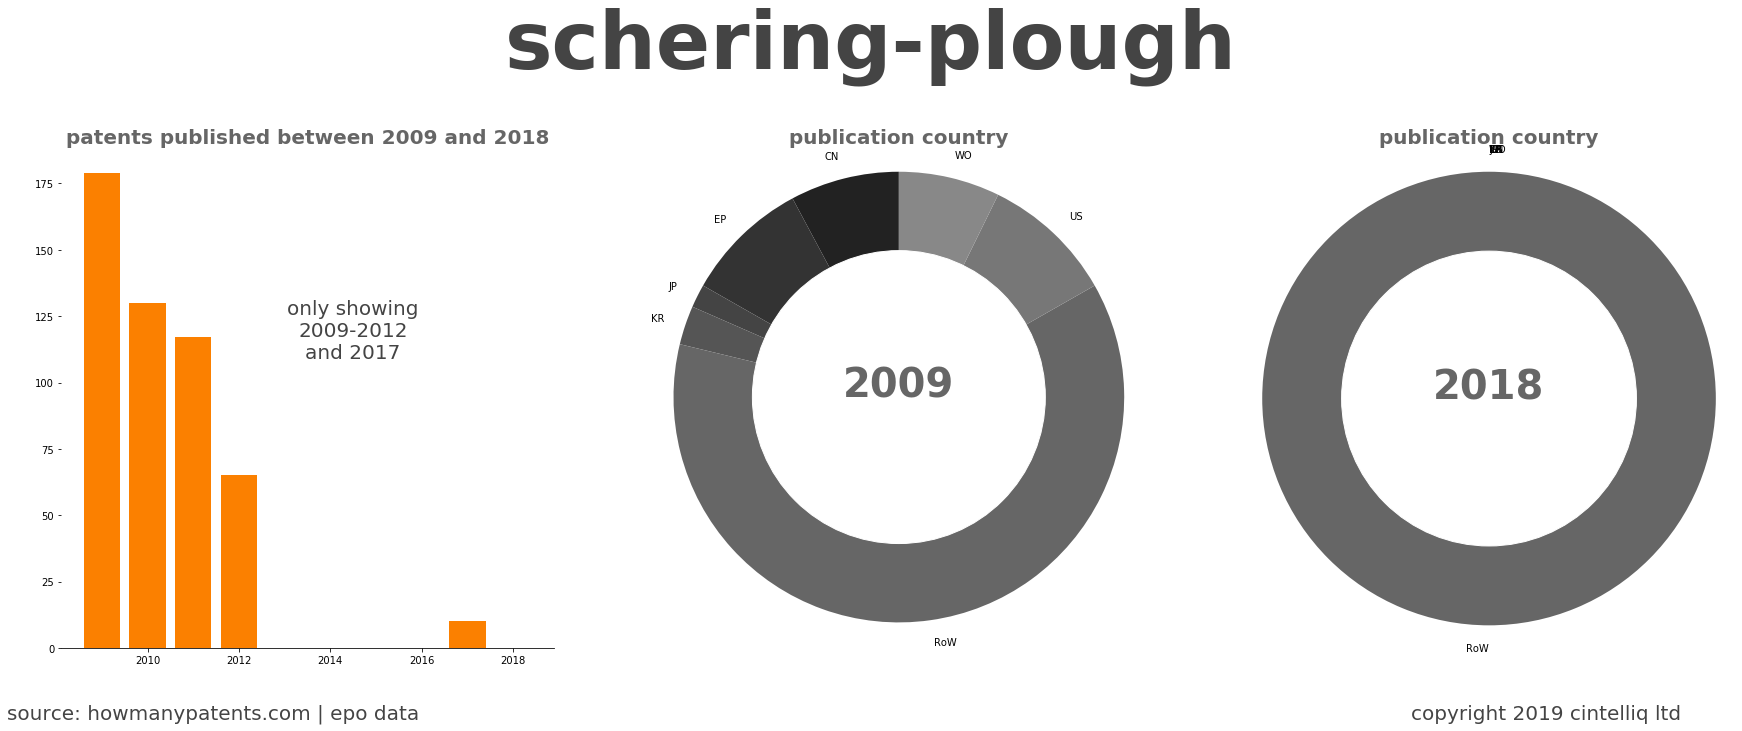 summary of patents for Schering-Plough